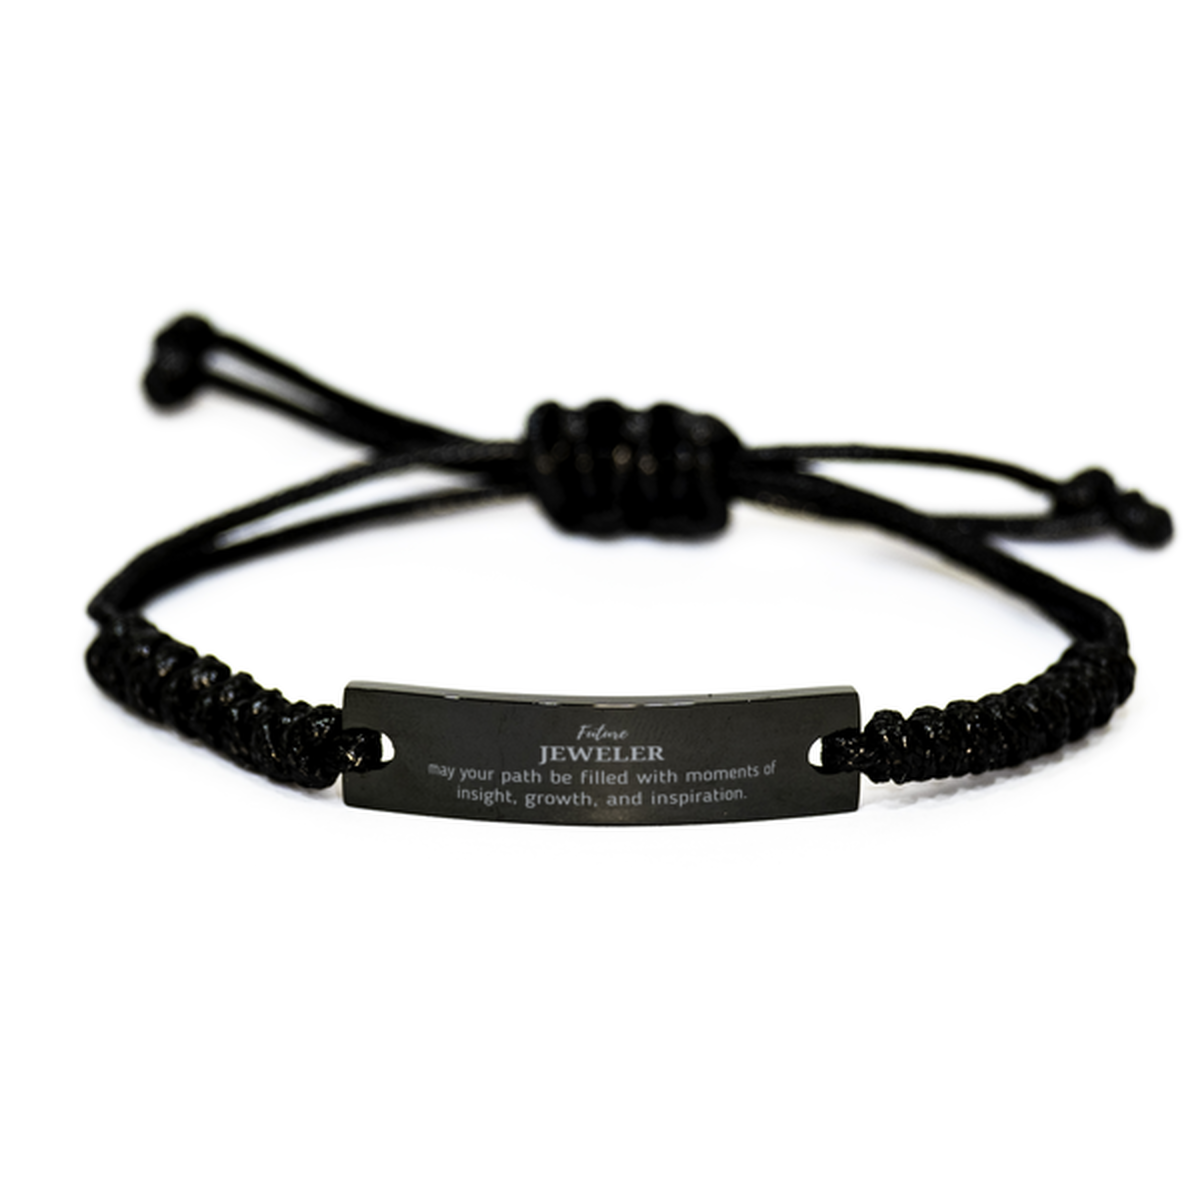 Future Jeweler Gifts, May your path be filled with moments of insight, Graduation Gifts for New Jeweler, Christmas Unique Black Rope Bracelet For Men, Women, Friends